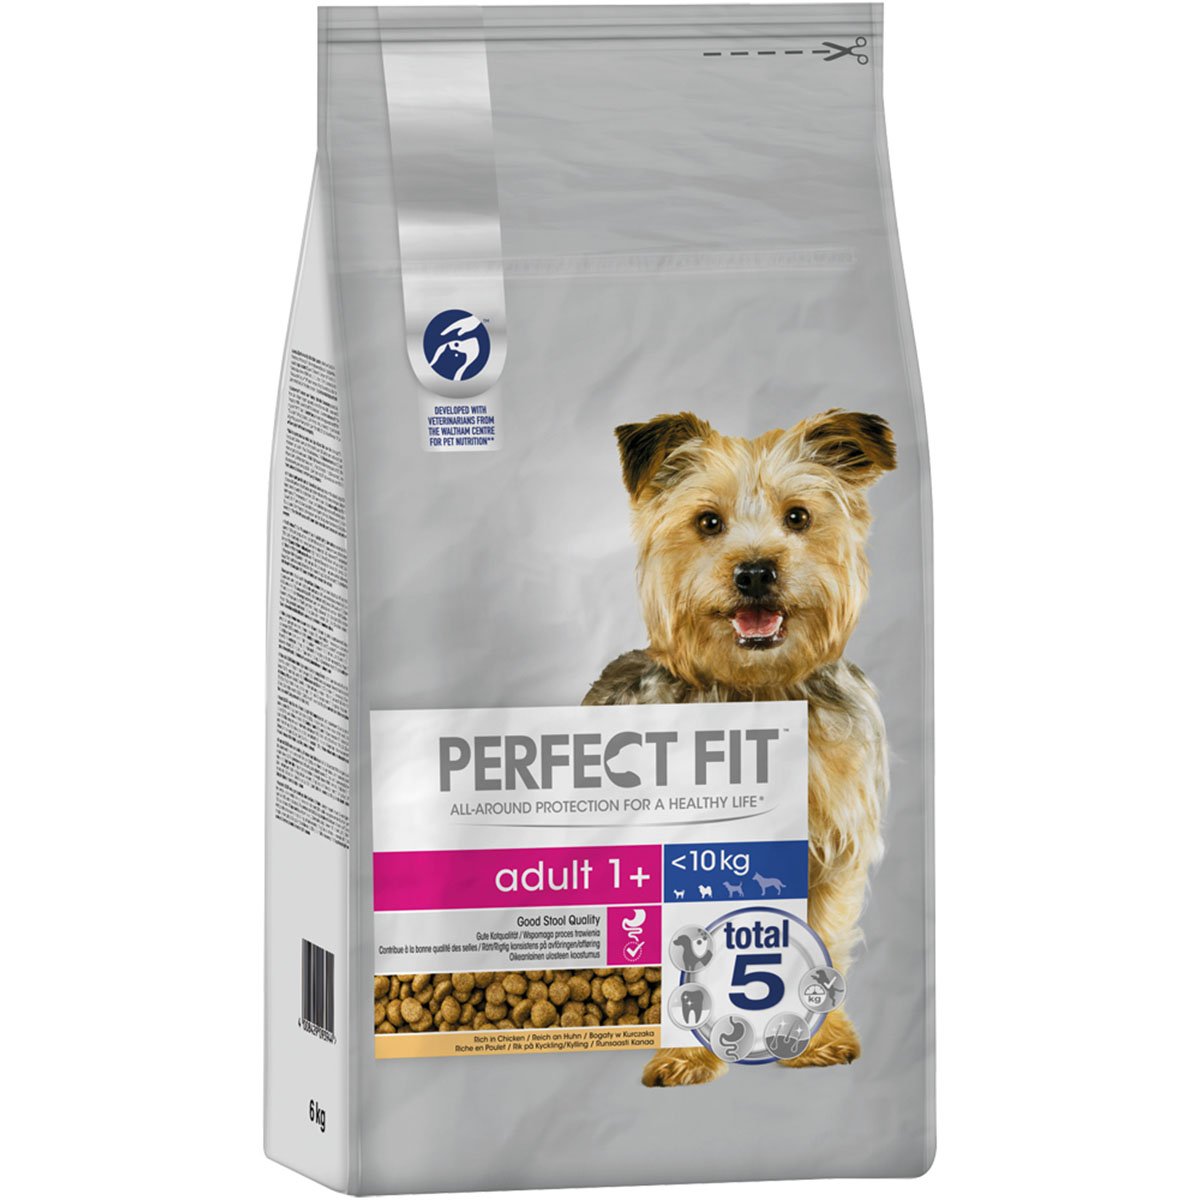 PERFECT FIT™ Hund Adult 1+ XS/S